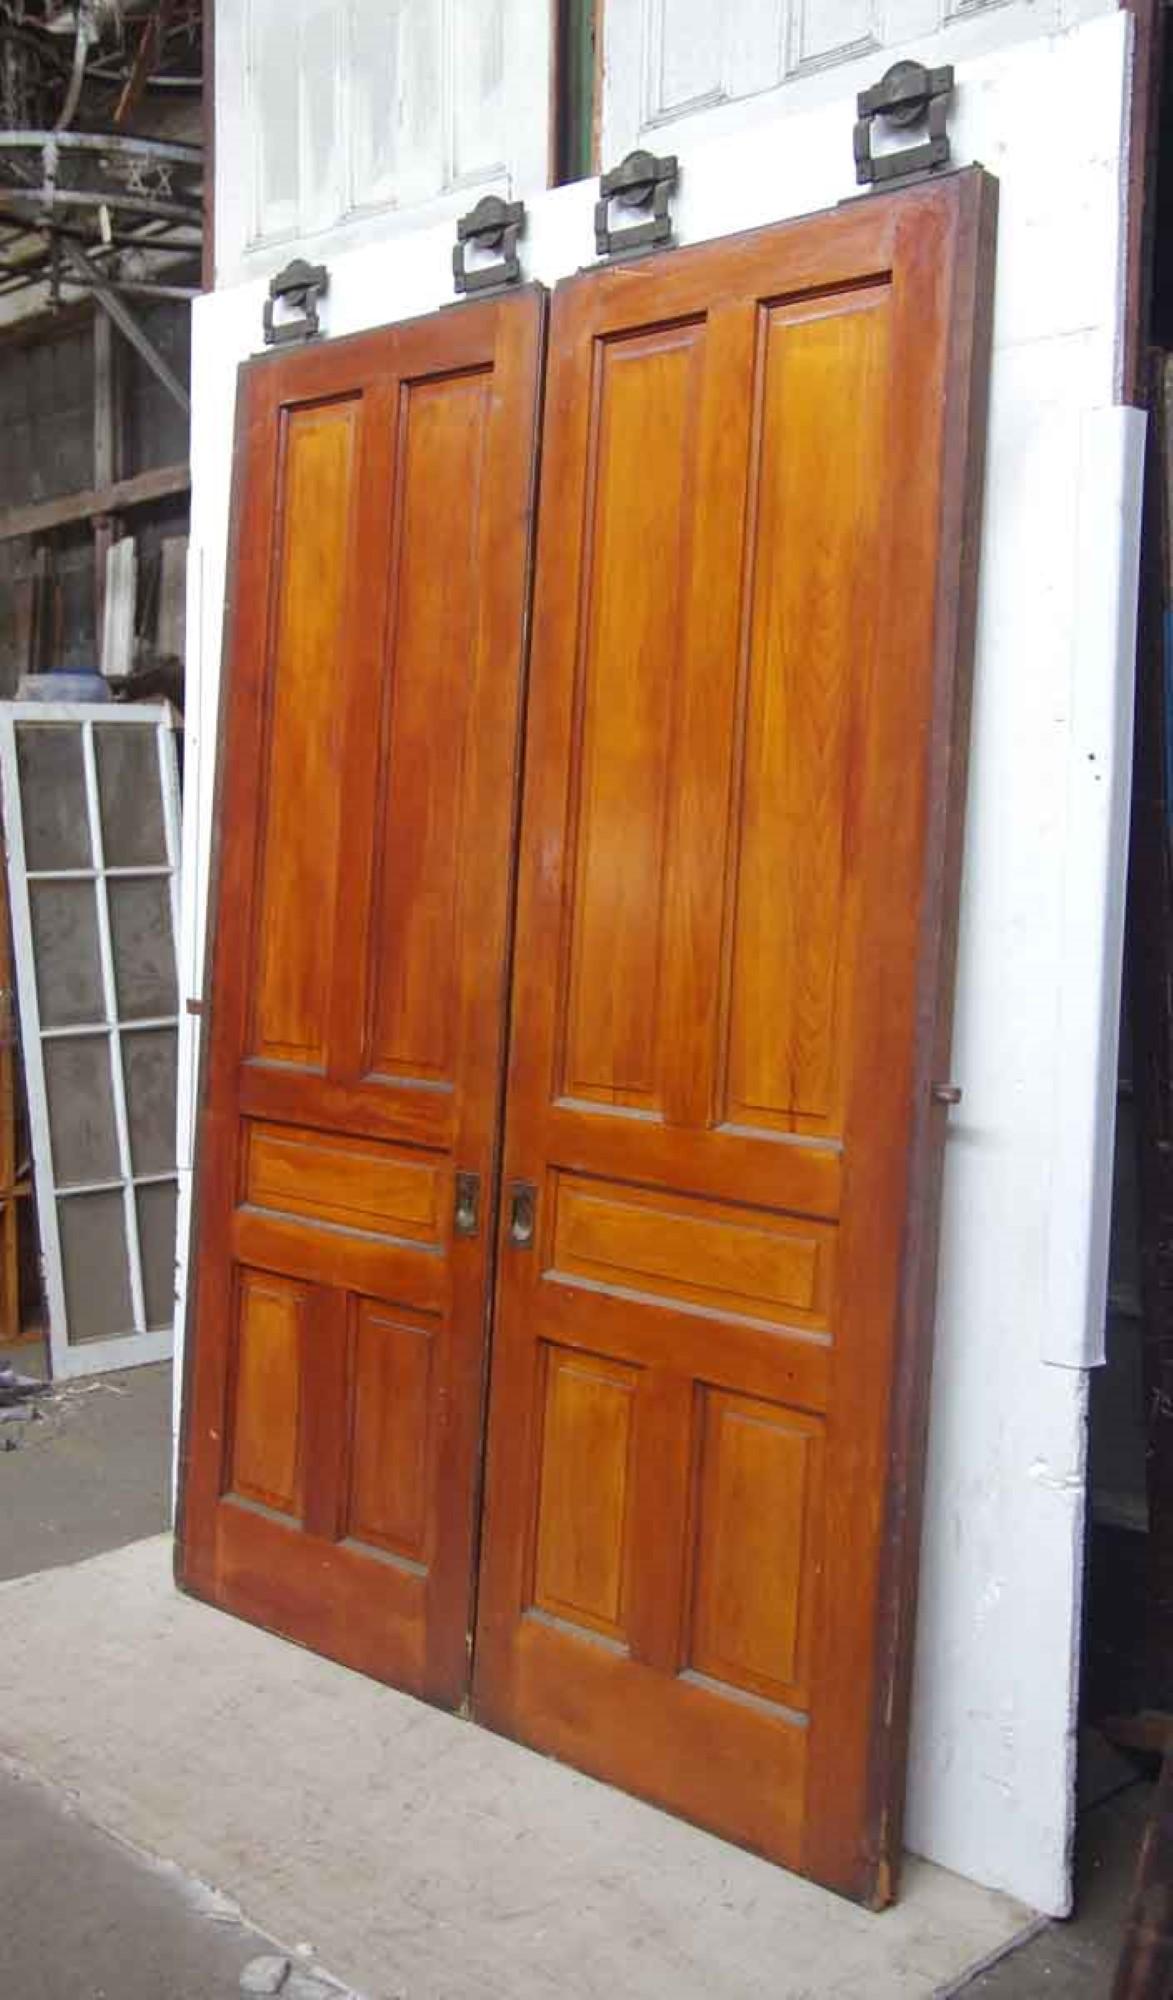 1890s pair of medium tone wood pocket doors with five panels each. Original hardware included. Measures: 89.5 inches x 62.5 inches. This can be seen at our 400 Gilligan St location in Scranton. PA.